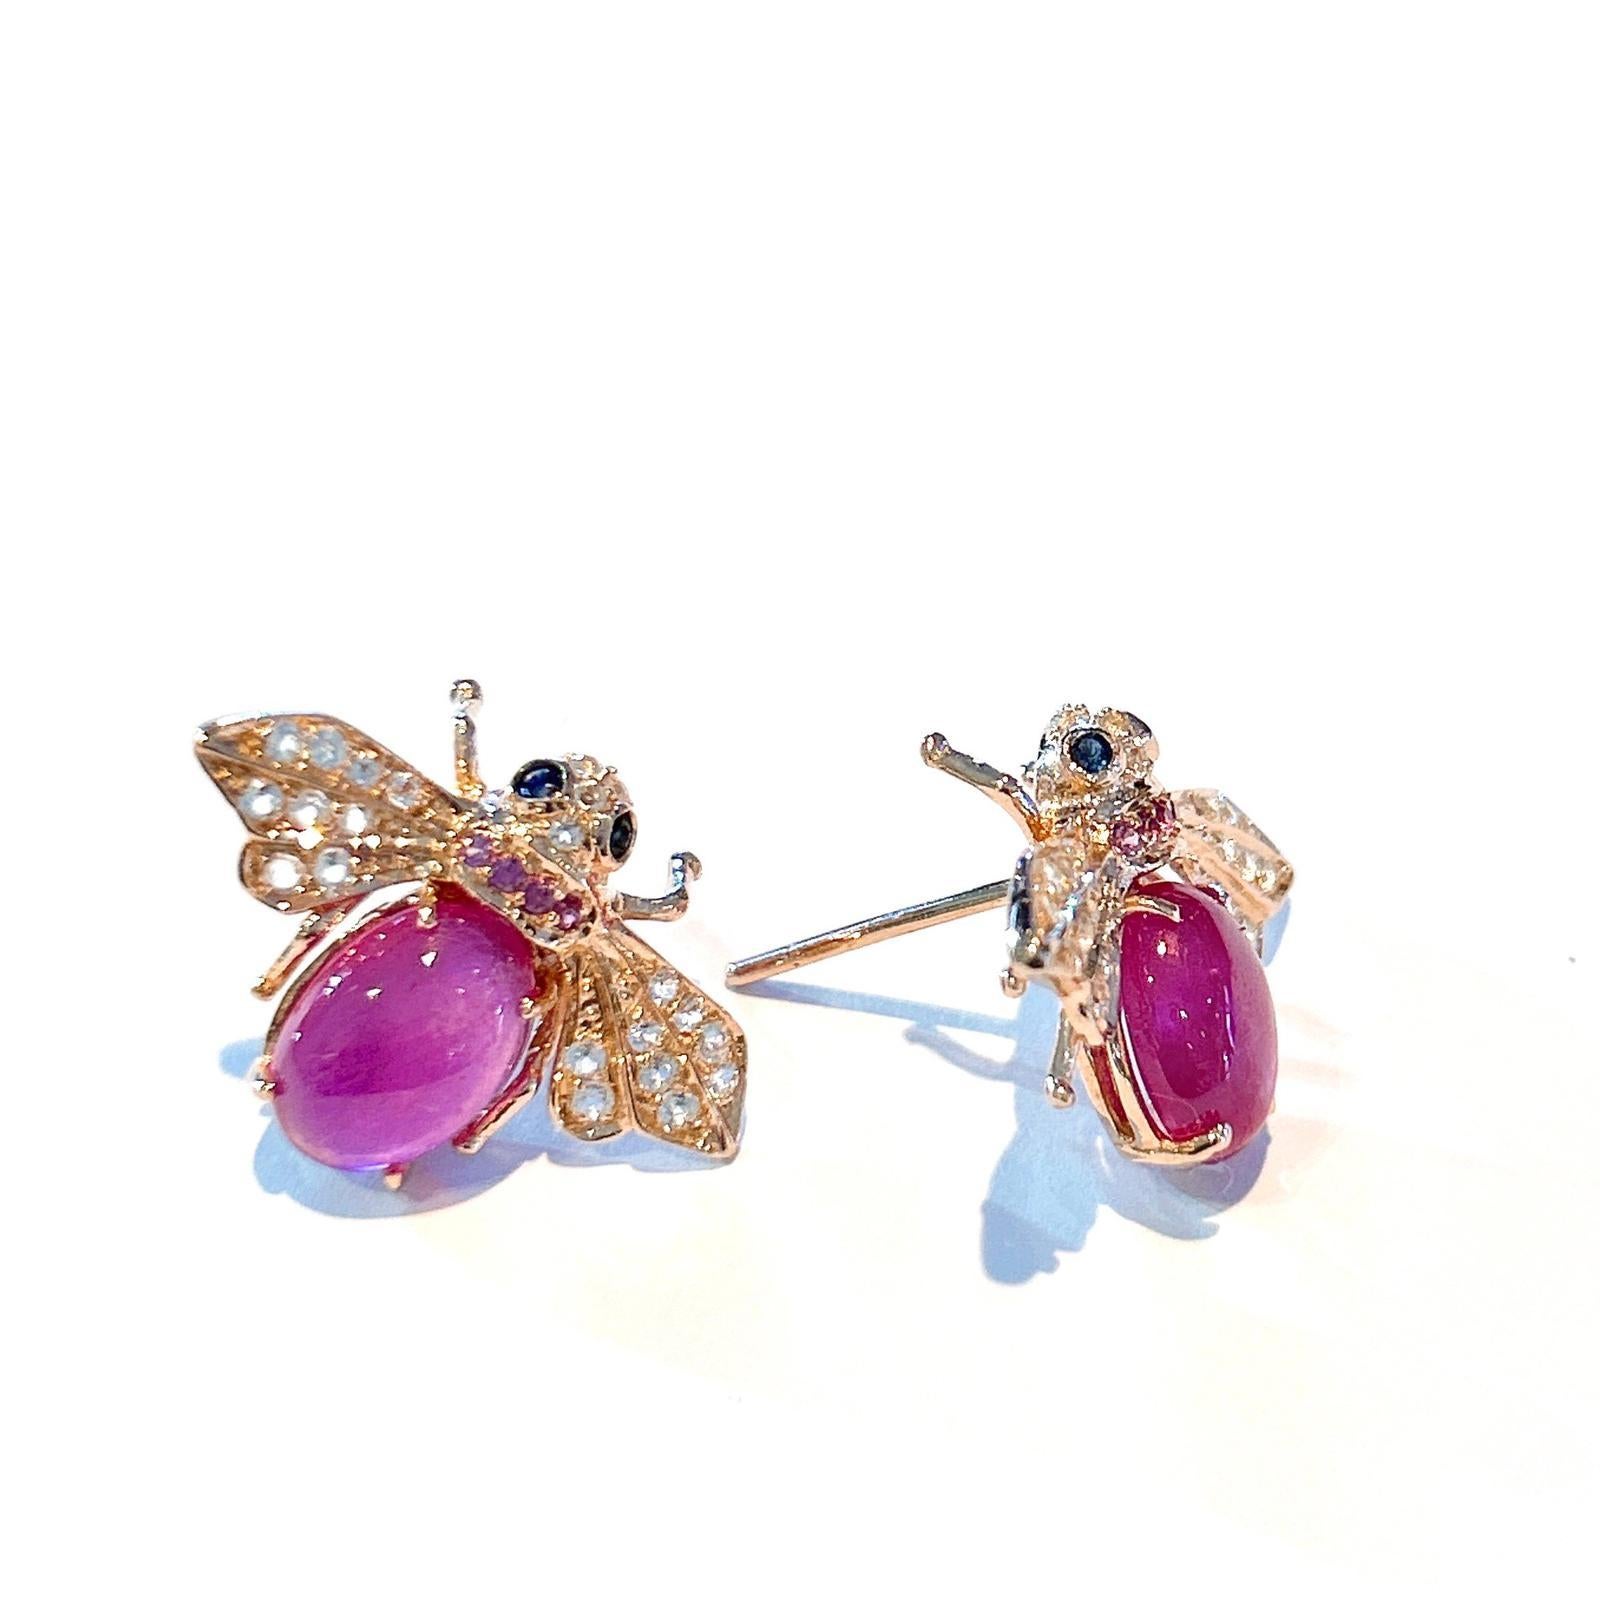 “Orient” Ruby Earrings with White Topaz & Blue Sapphire Set in 22k Gold 1